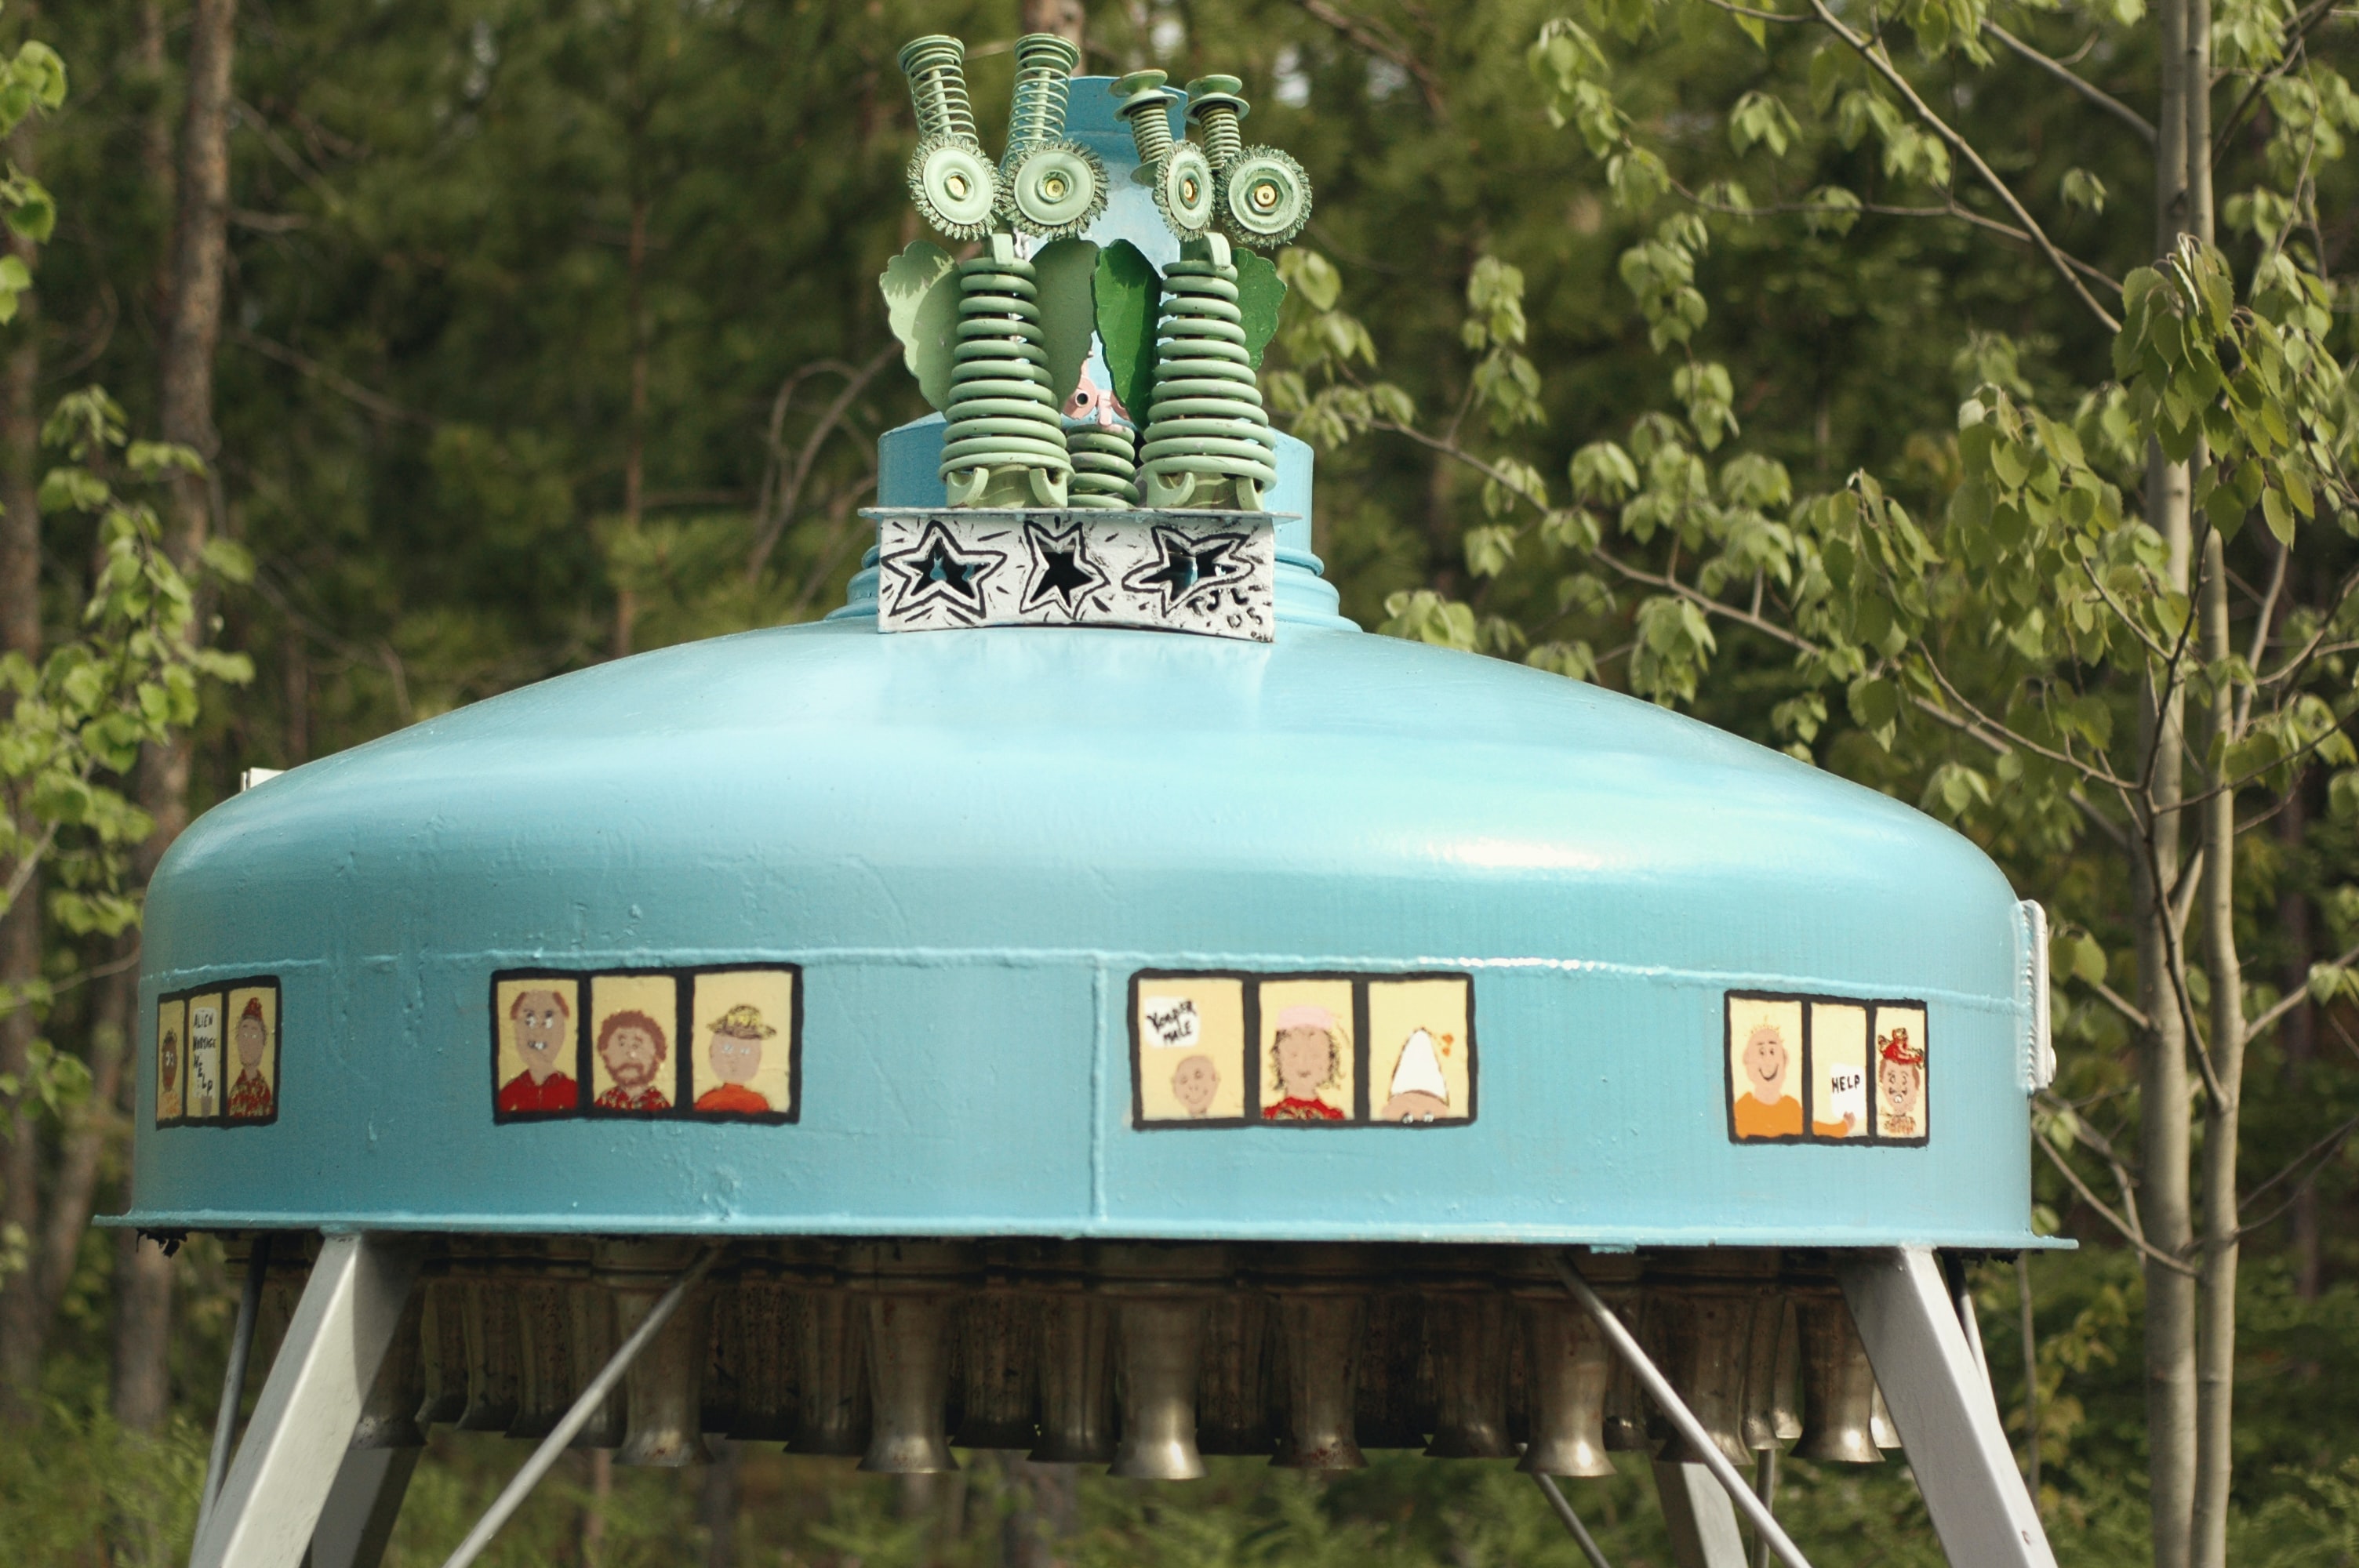 teal space ship made from recycled materials